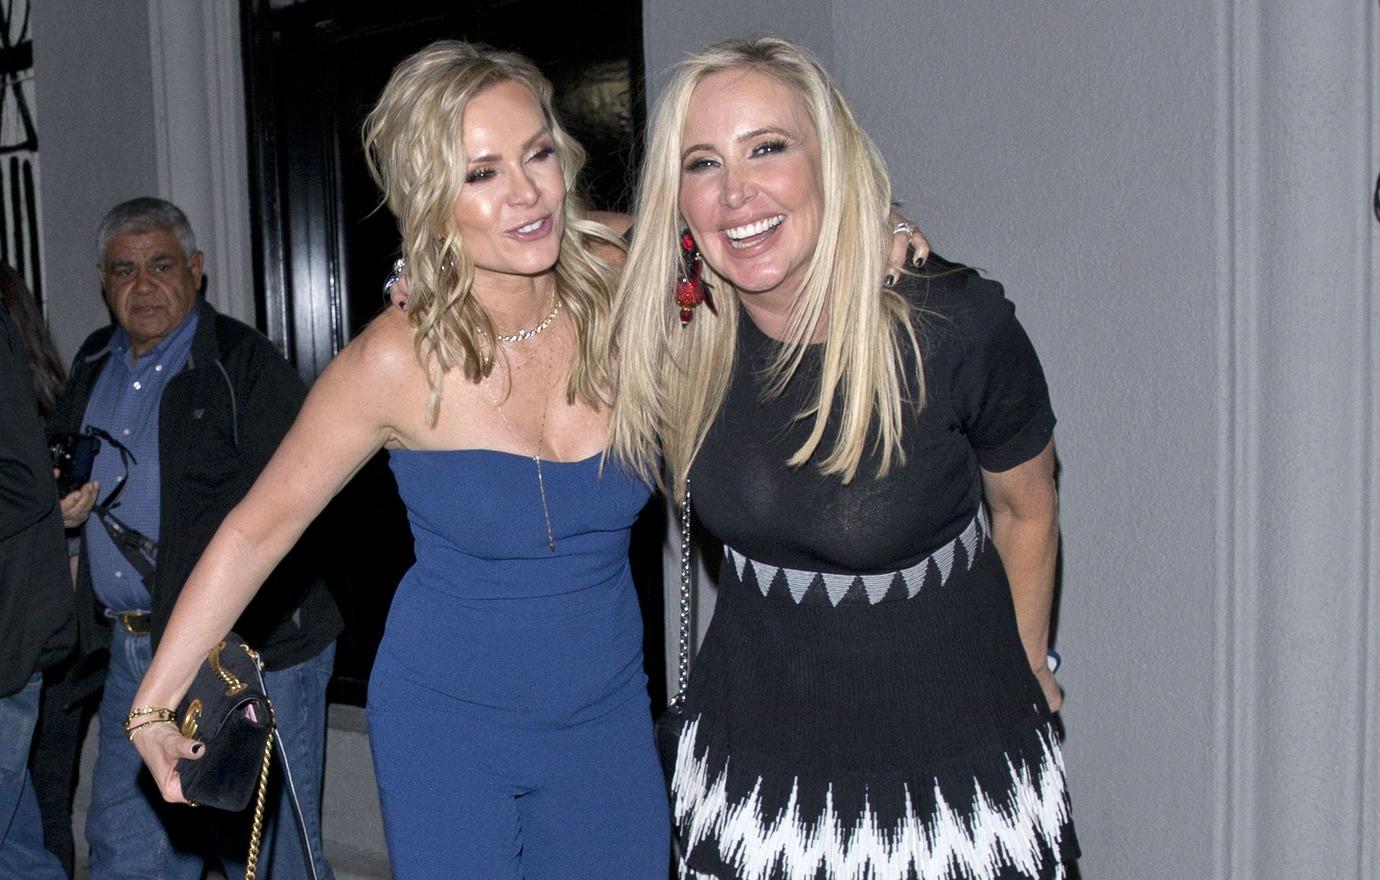 RHOC Tamra Judge Says She And Shannon Beador Are Swingers